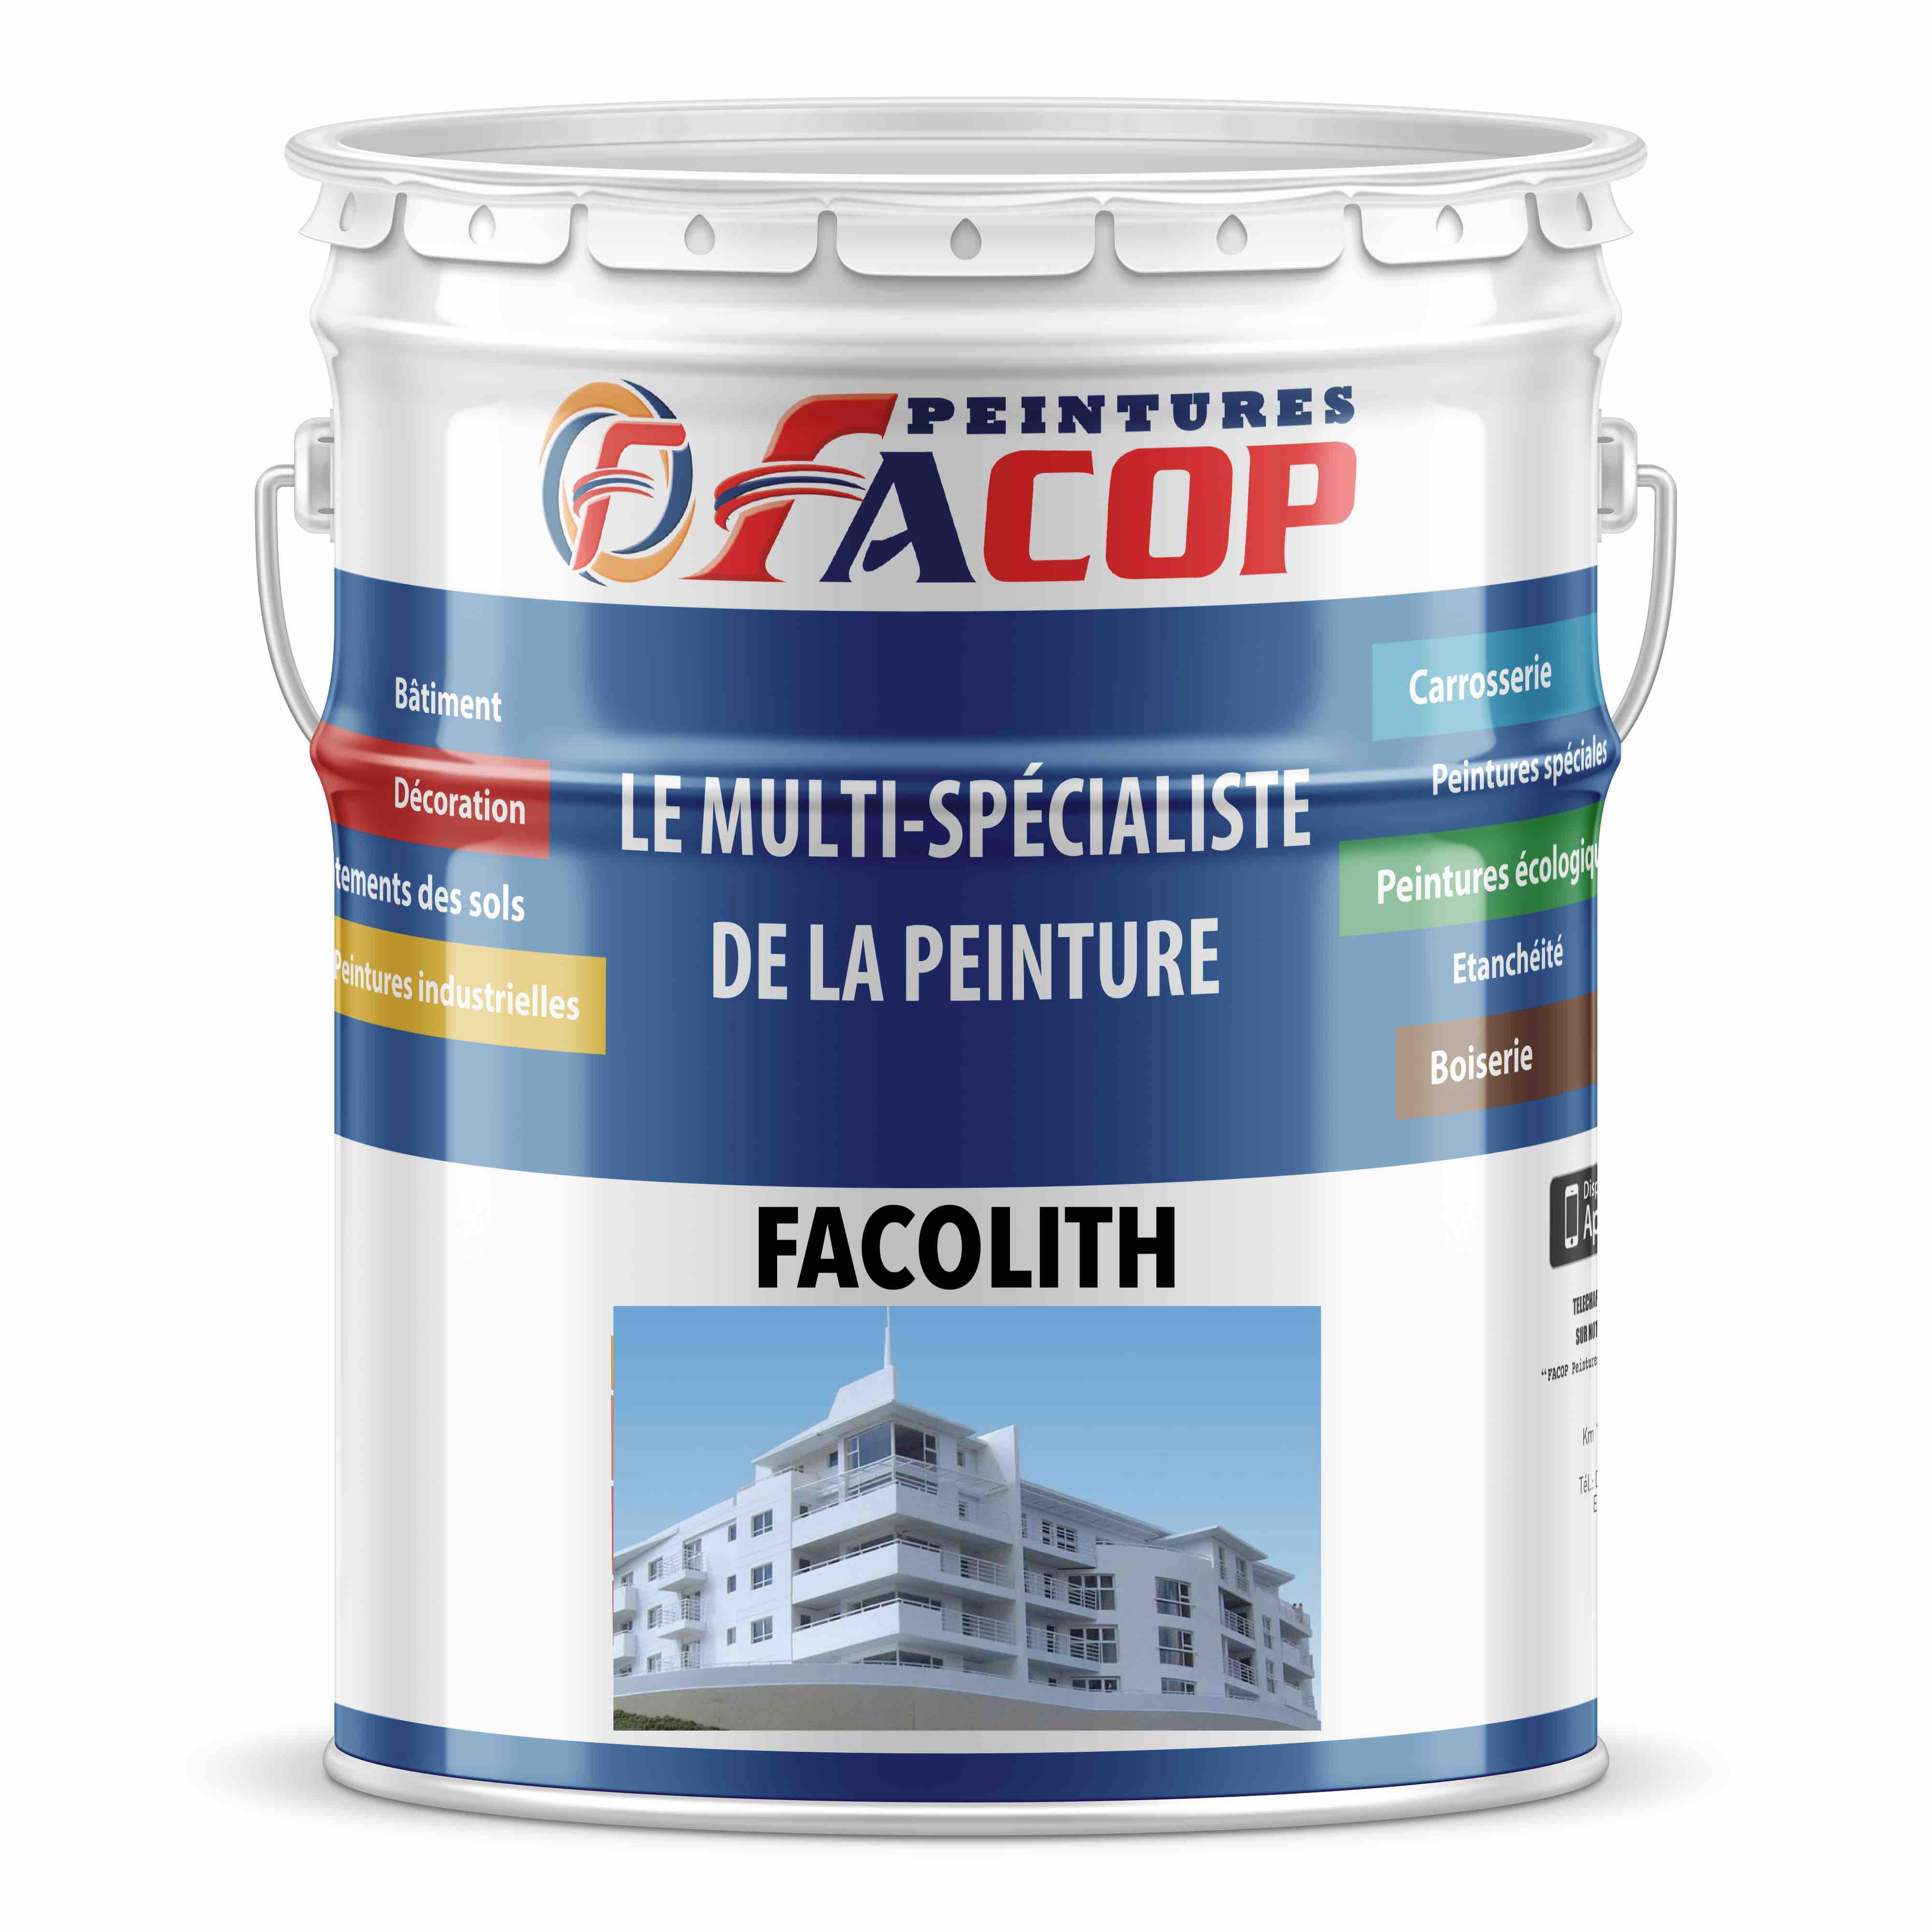 Facolith